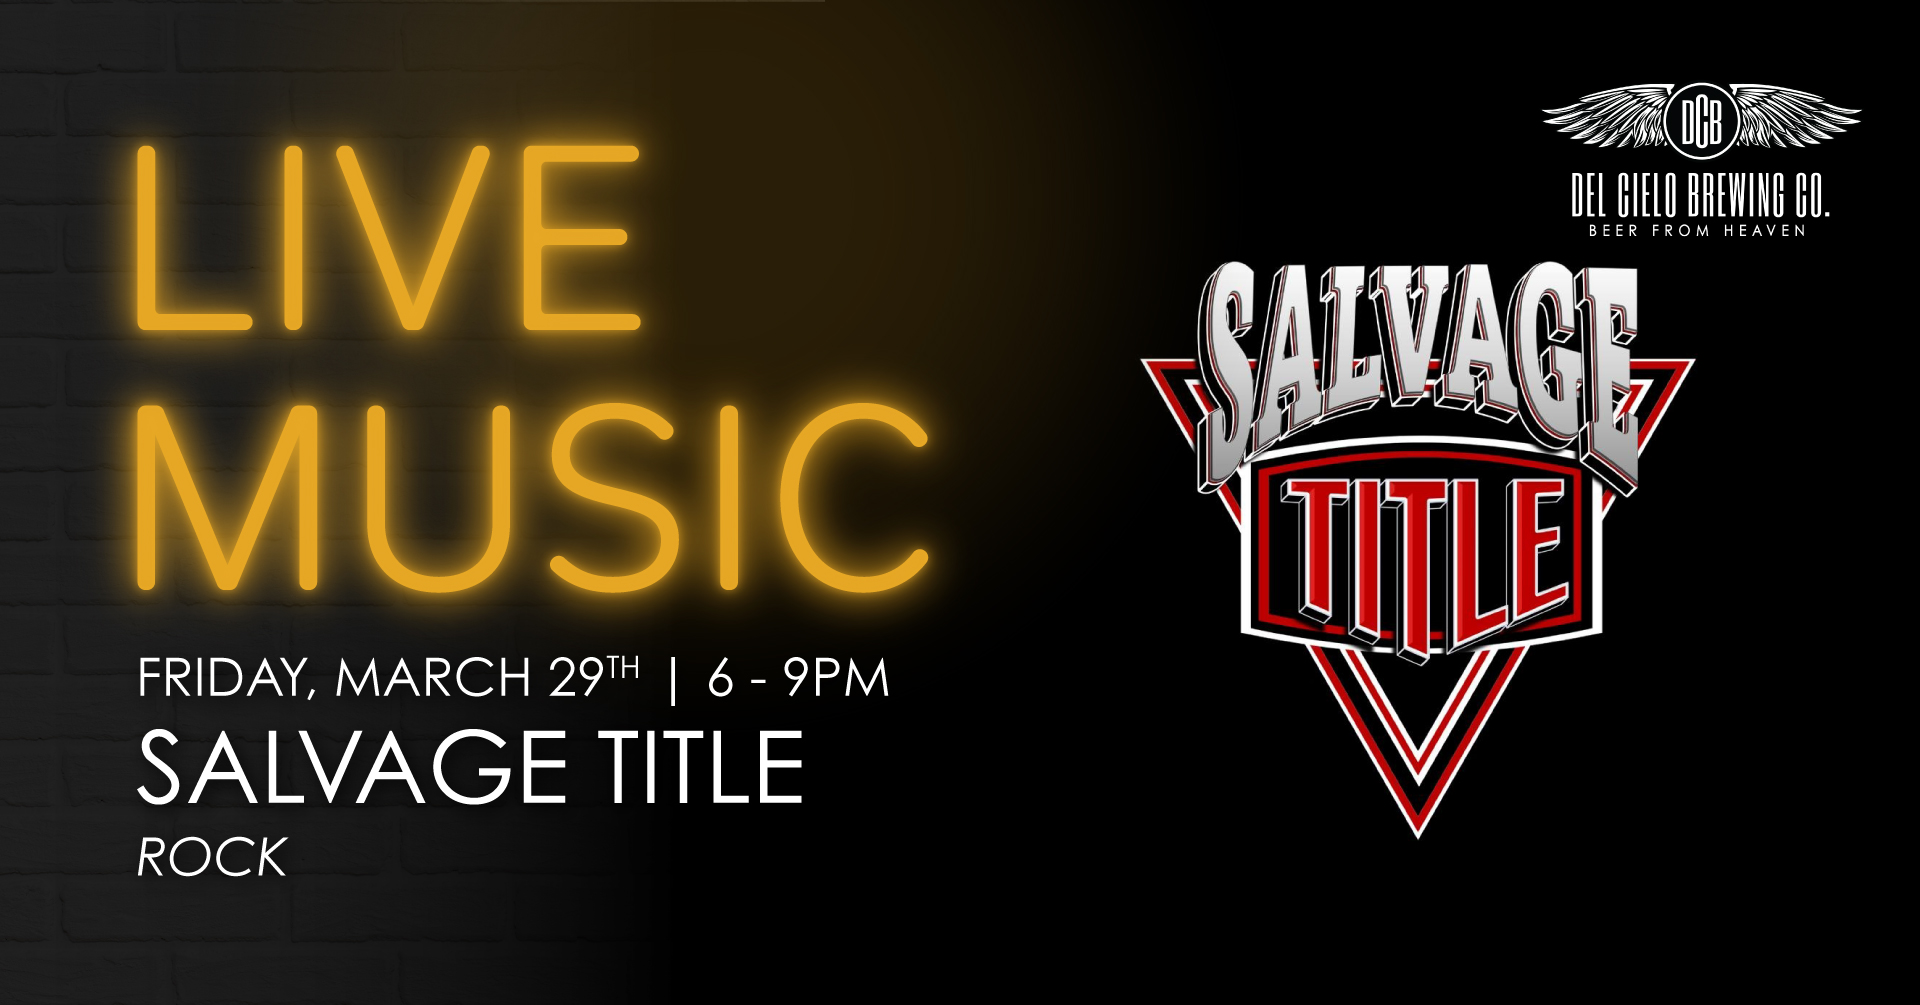 Salvage Title friday march 29th live music